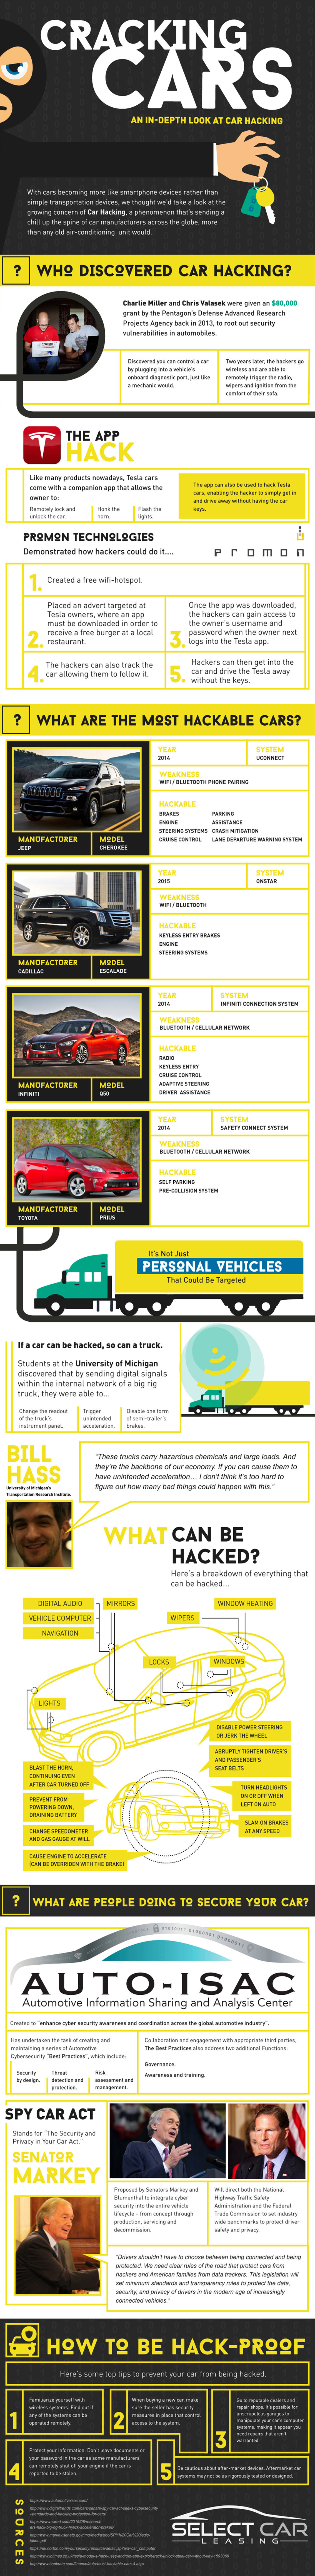 In-Depth Look on Vehicle Hacking - Car infographic